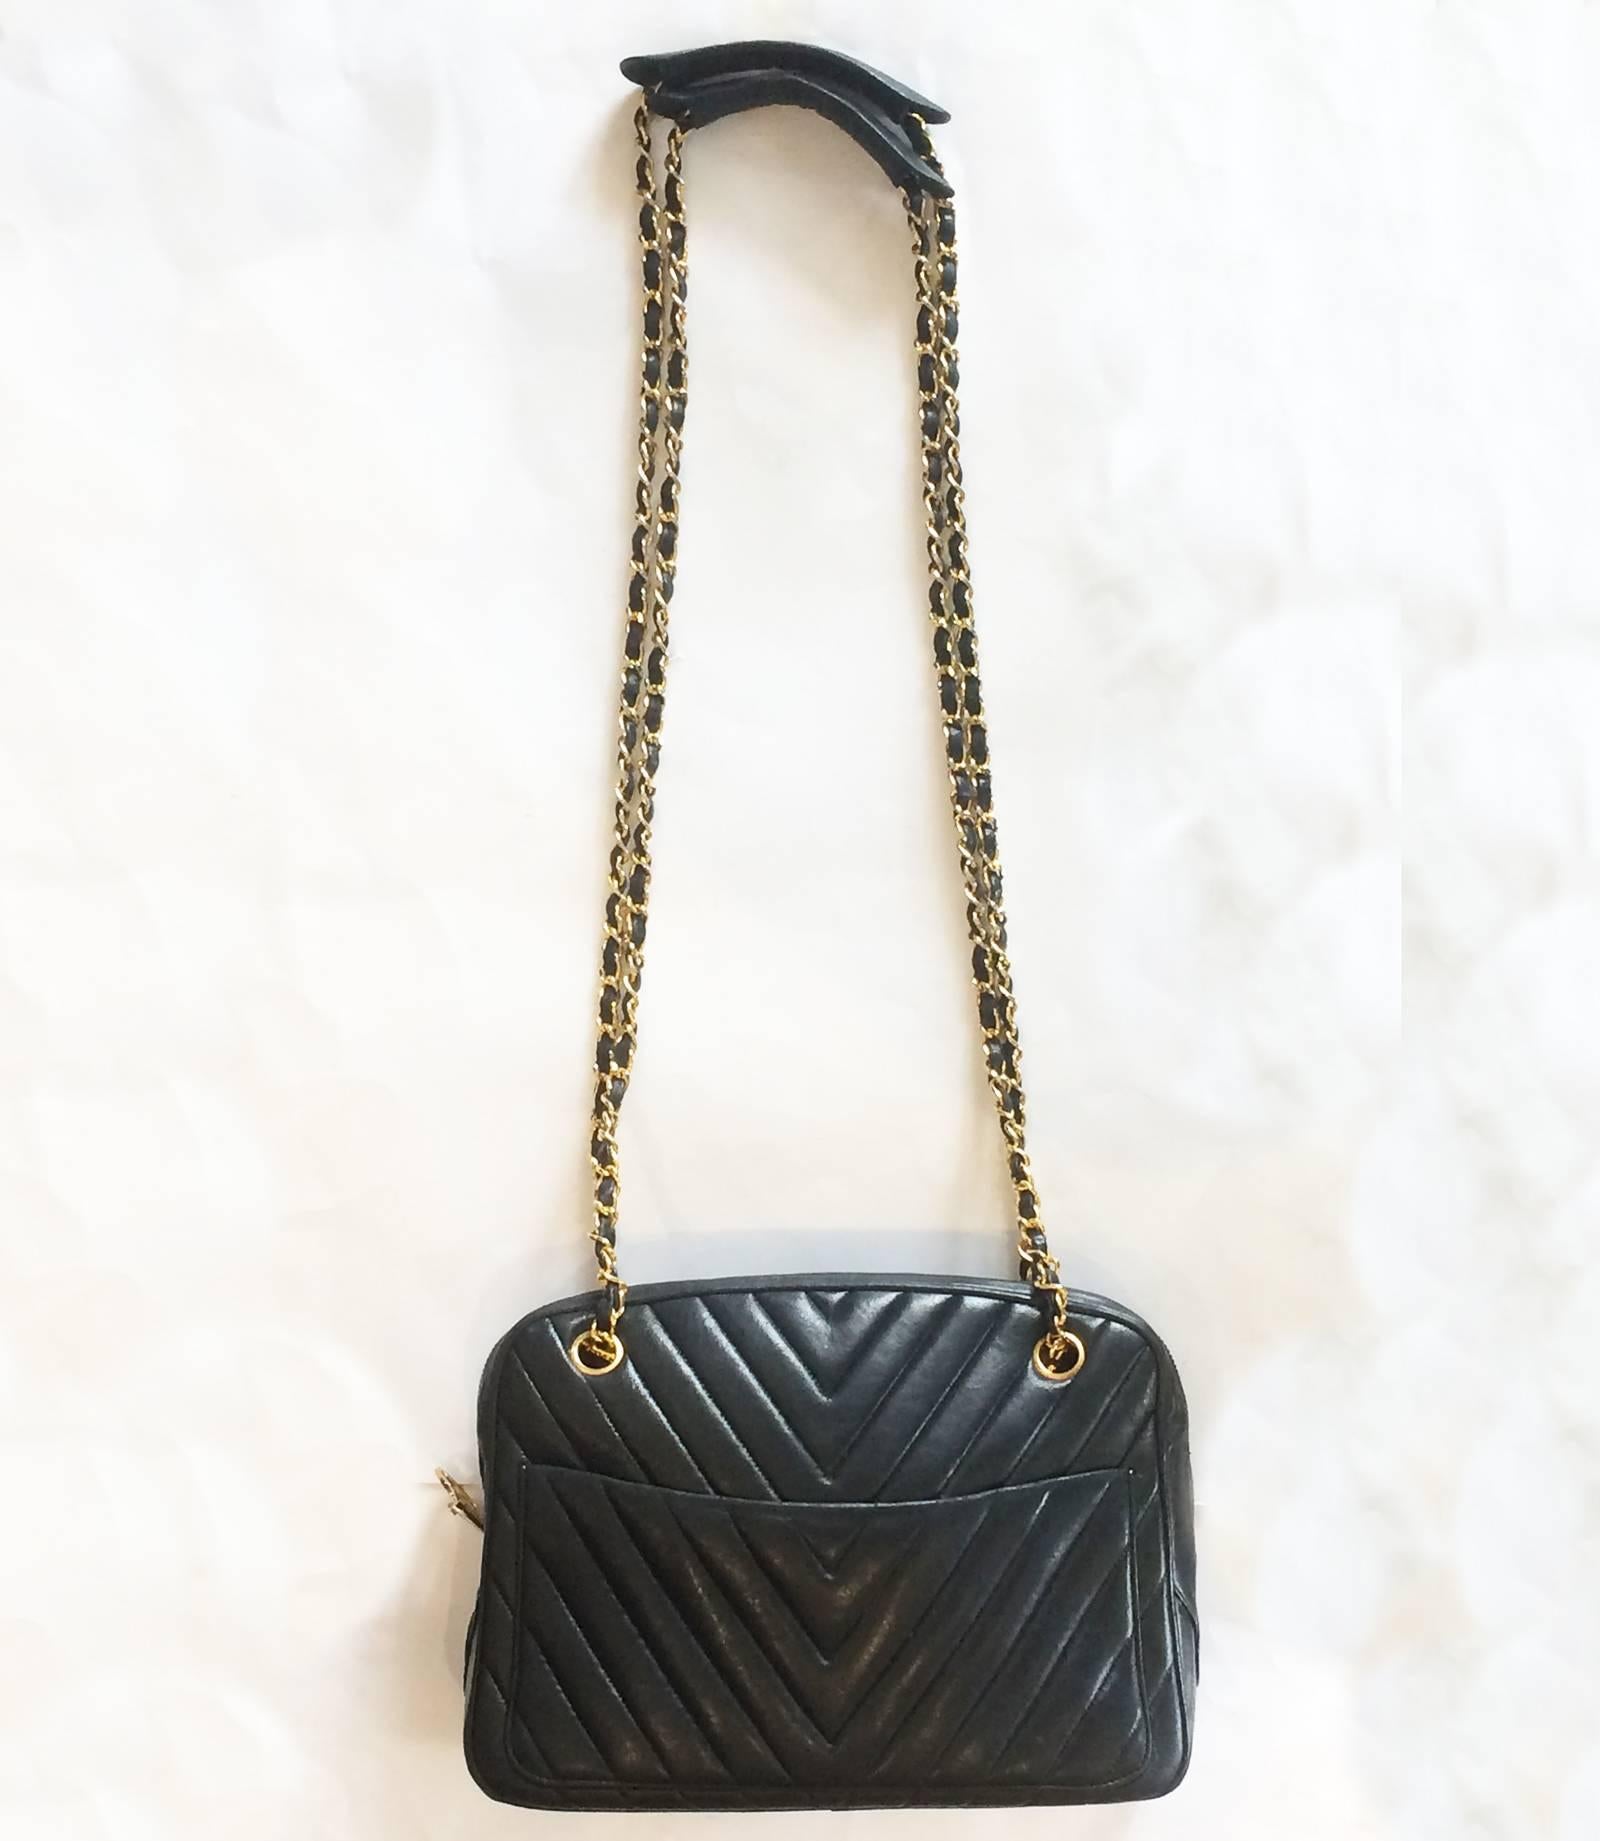 Authentic Shoulder Bag by Chanel, in Black  Leather with “V” stitch and black leather threaded, gilt chain shoulder straps, with adjustable padded tops and adjustable/removable straps. Outer has a large pocket to both front and rear; inner is fitted